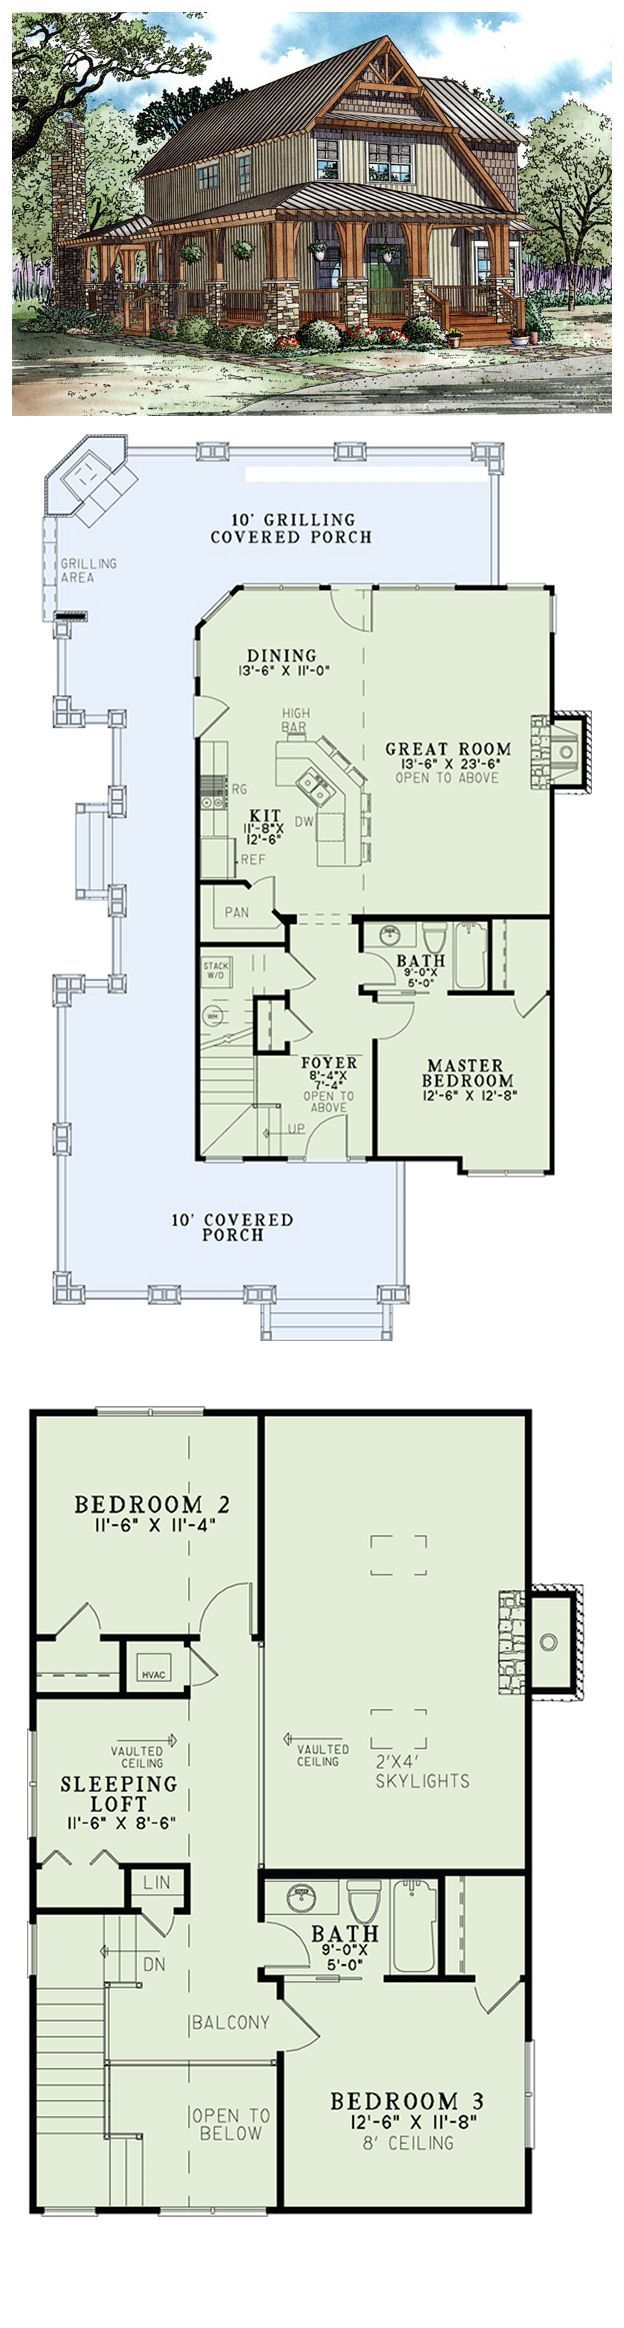 House Plan 82251 | Total living area: 1705 sq ft, 3 bedrooms & 2 bathrooms. Family and friends will create